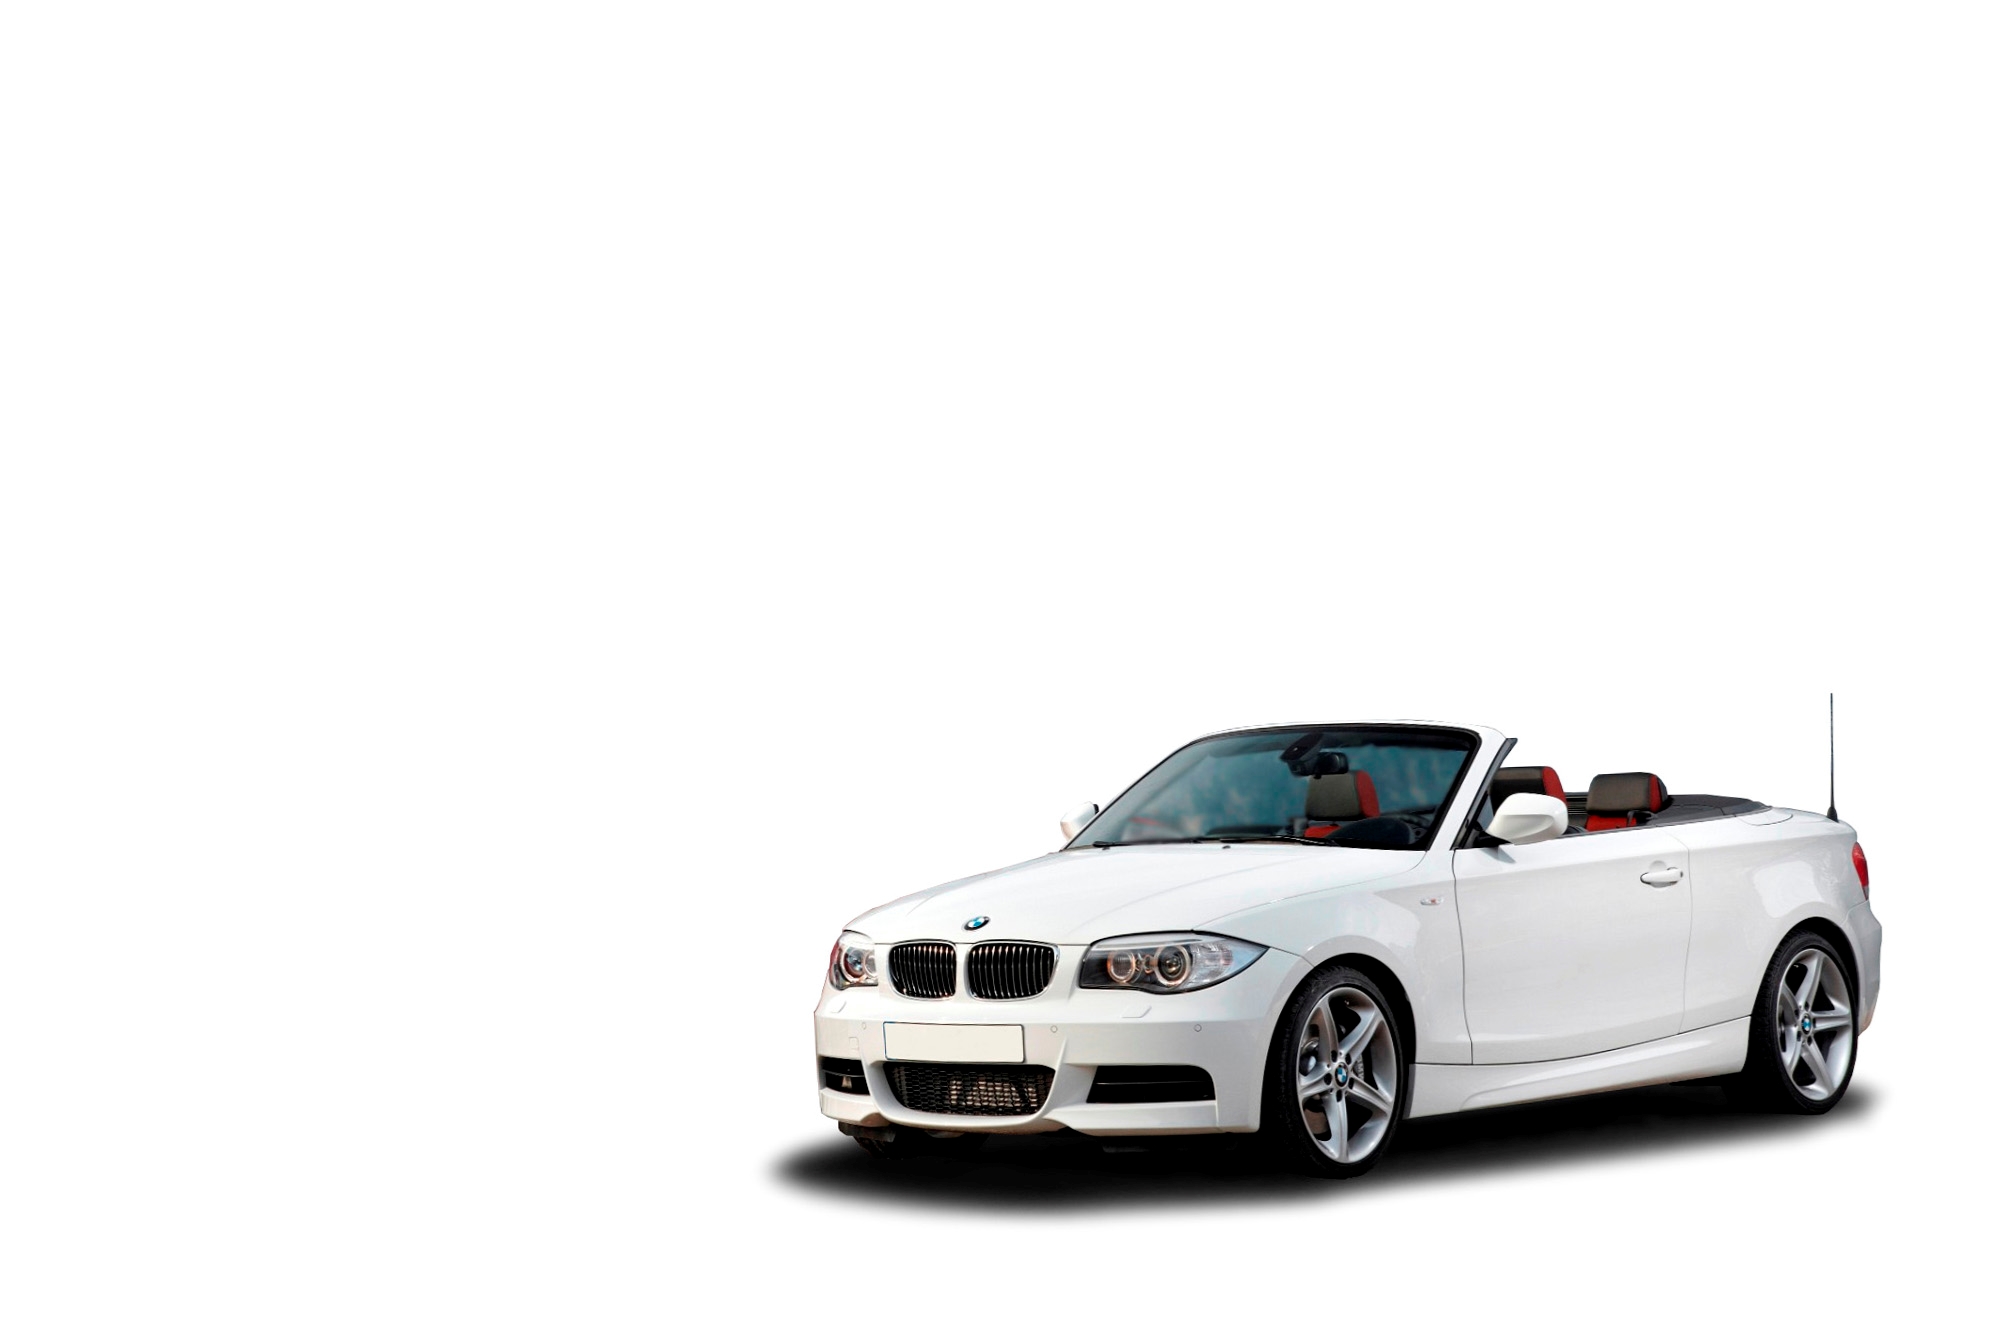 2012 BMW 128i Convertible Full Specs, Features and Price | CarBuzz